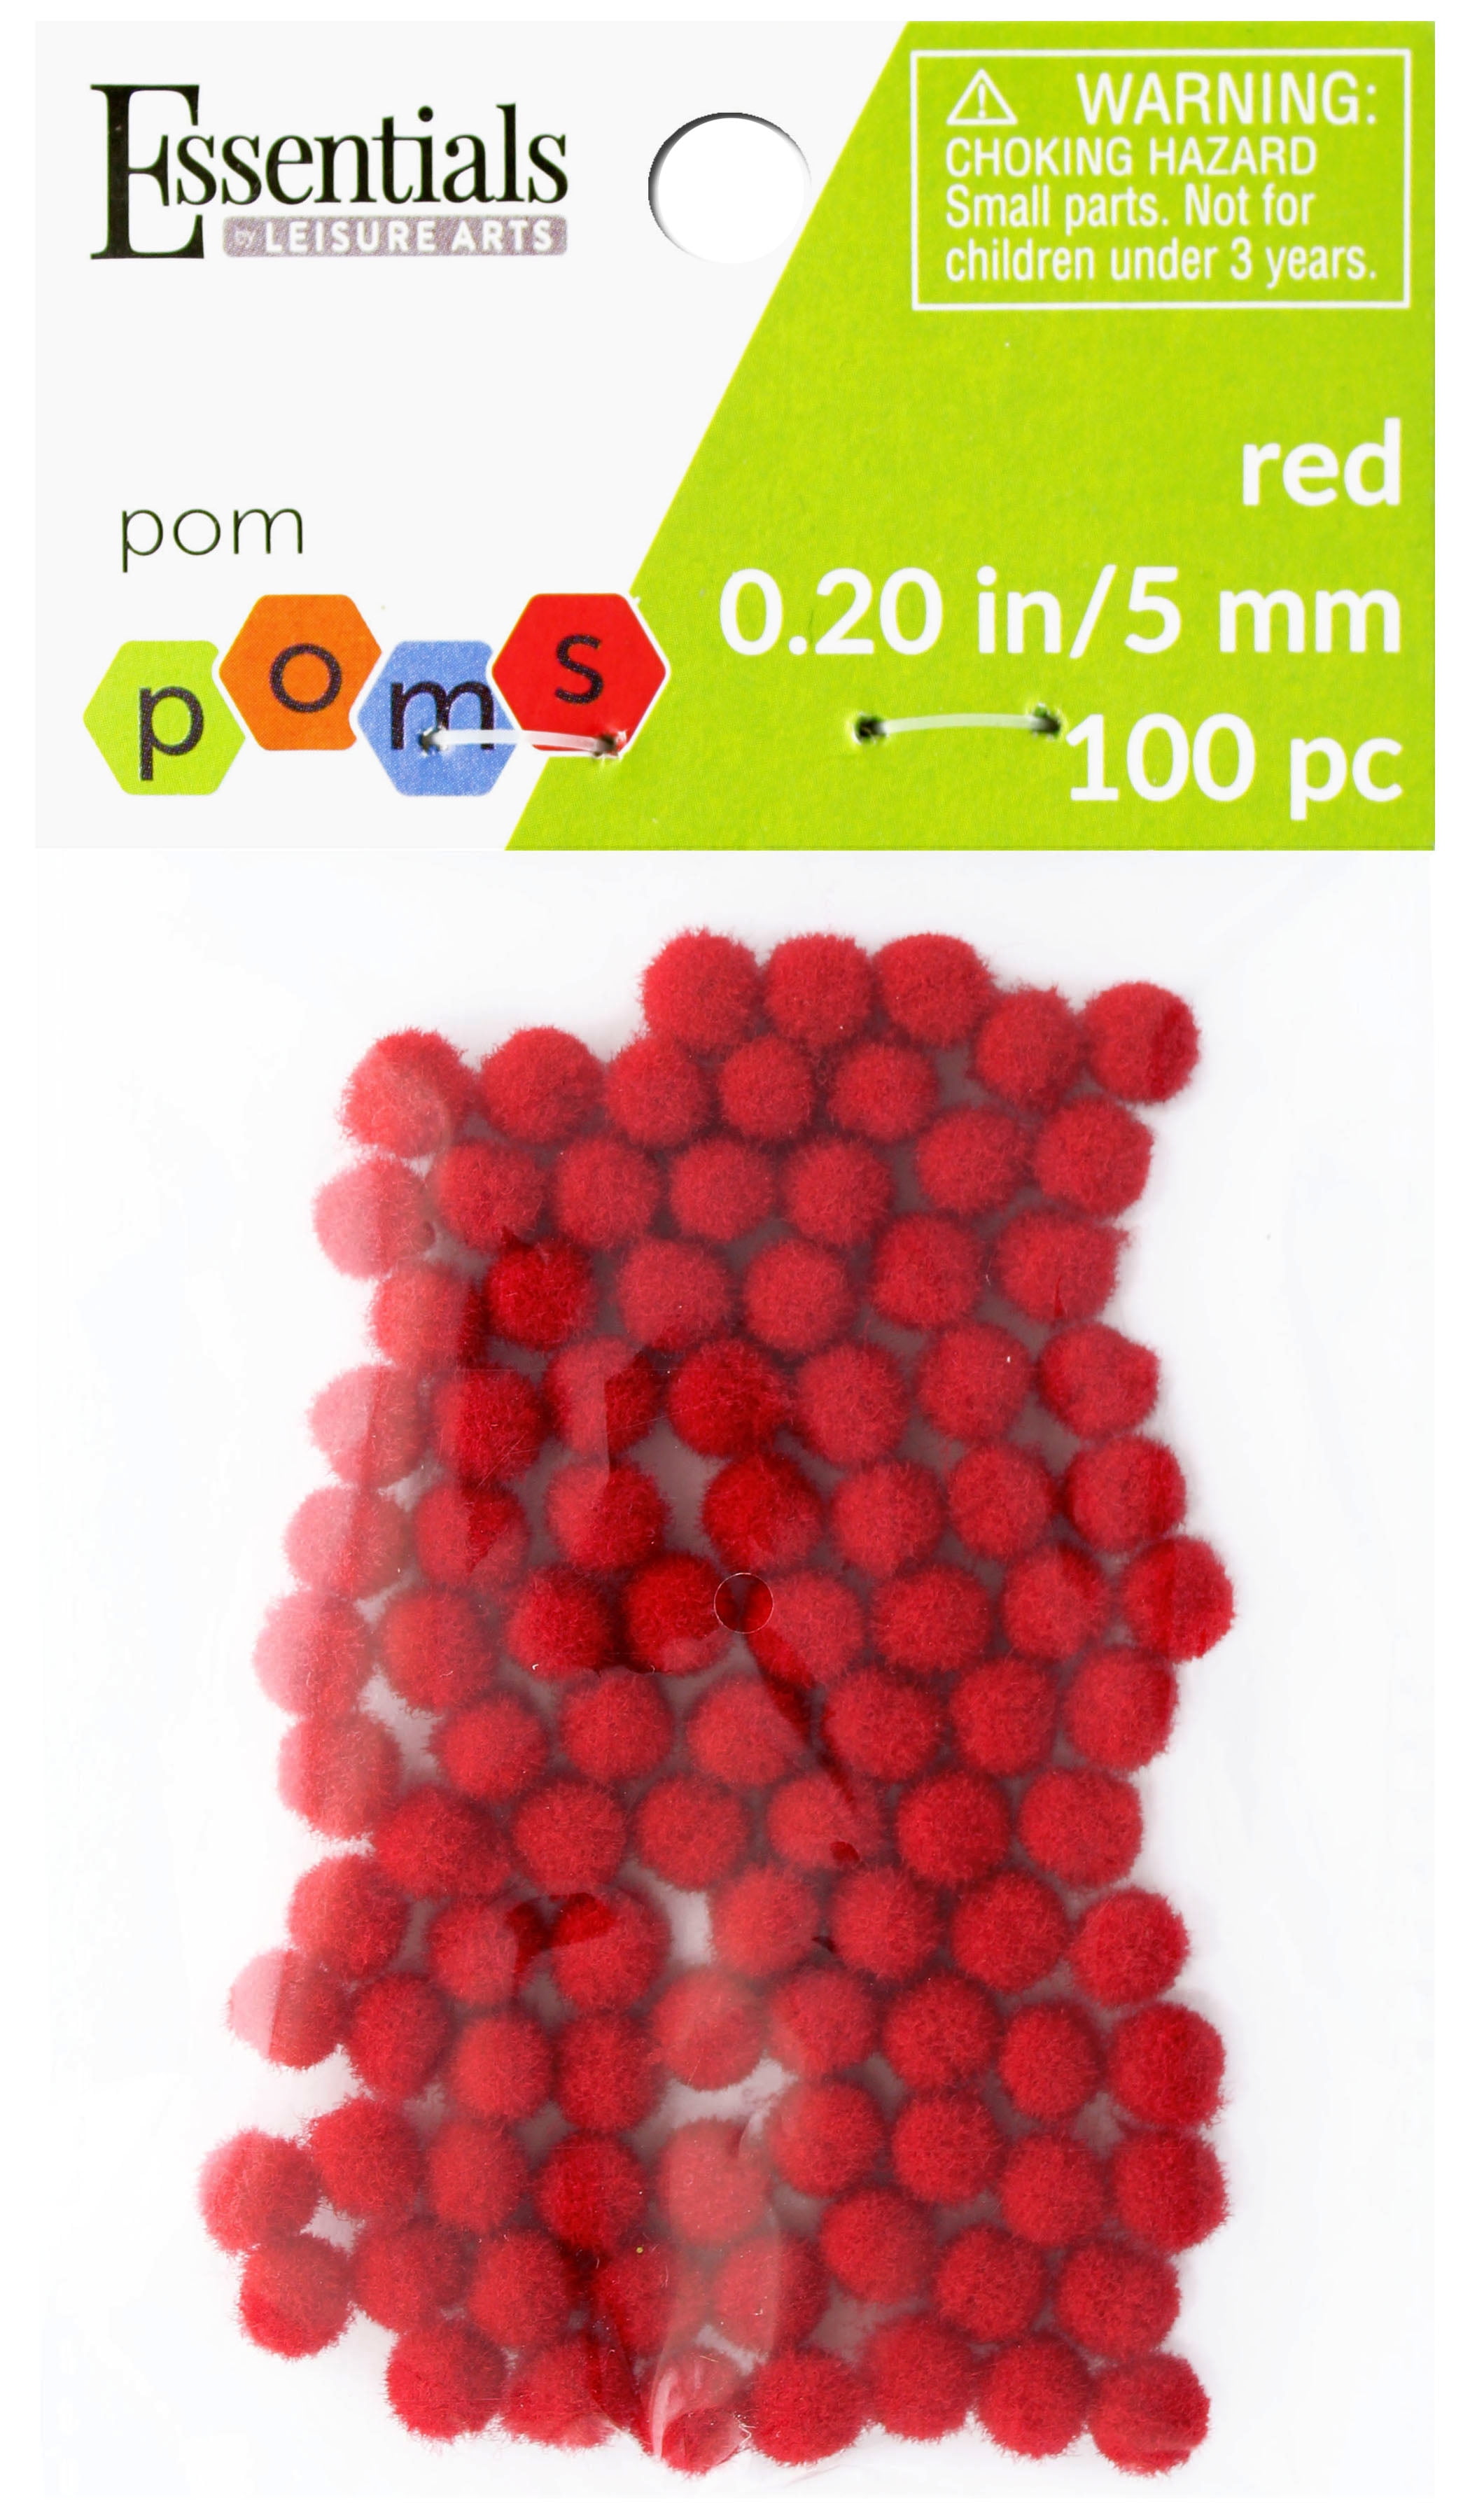 The Crafts Outlet Polyester Pom Poms, Solid Color, 7mm/0.28-inch, 100-pc, Dark Brown